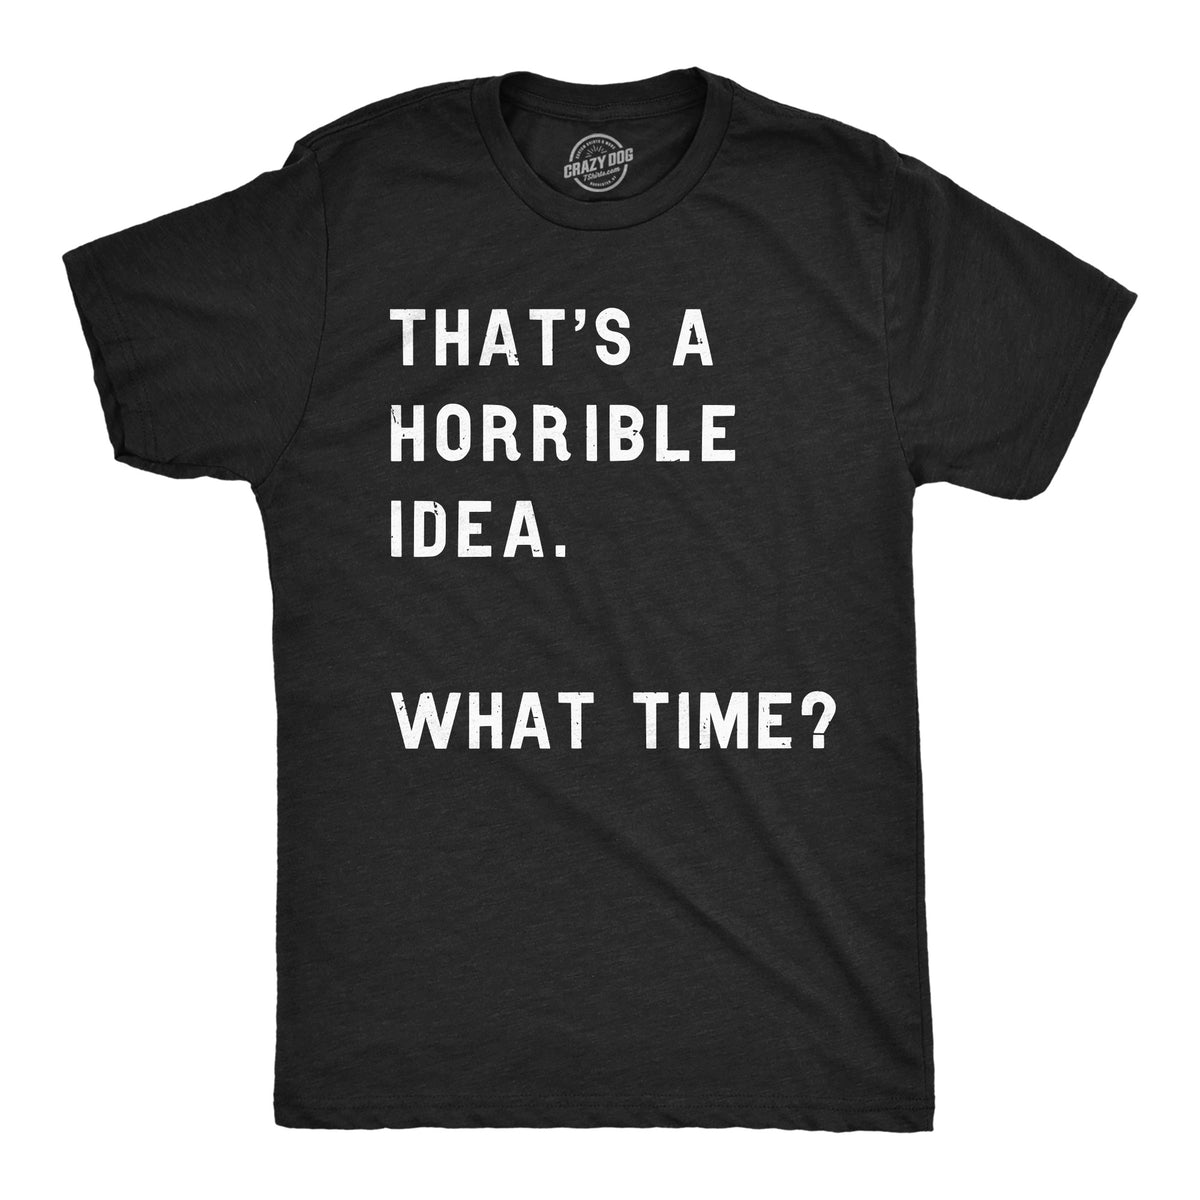 Funny Heather Black That Soulds Like A Horrible Idea. What Time? Mens T Shirt Nerdy Sarcastic Tee